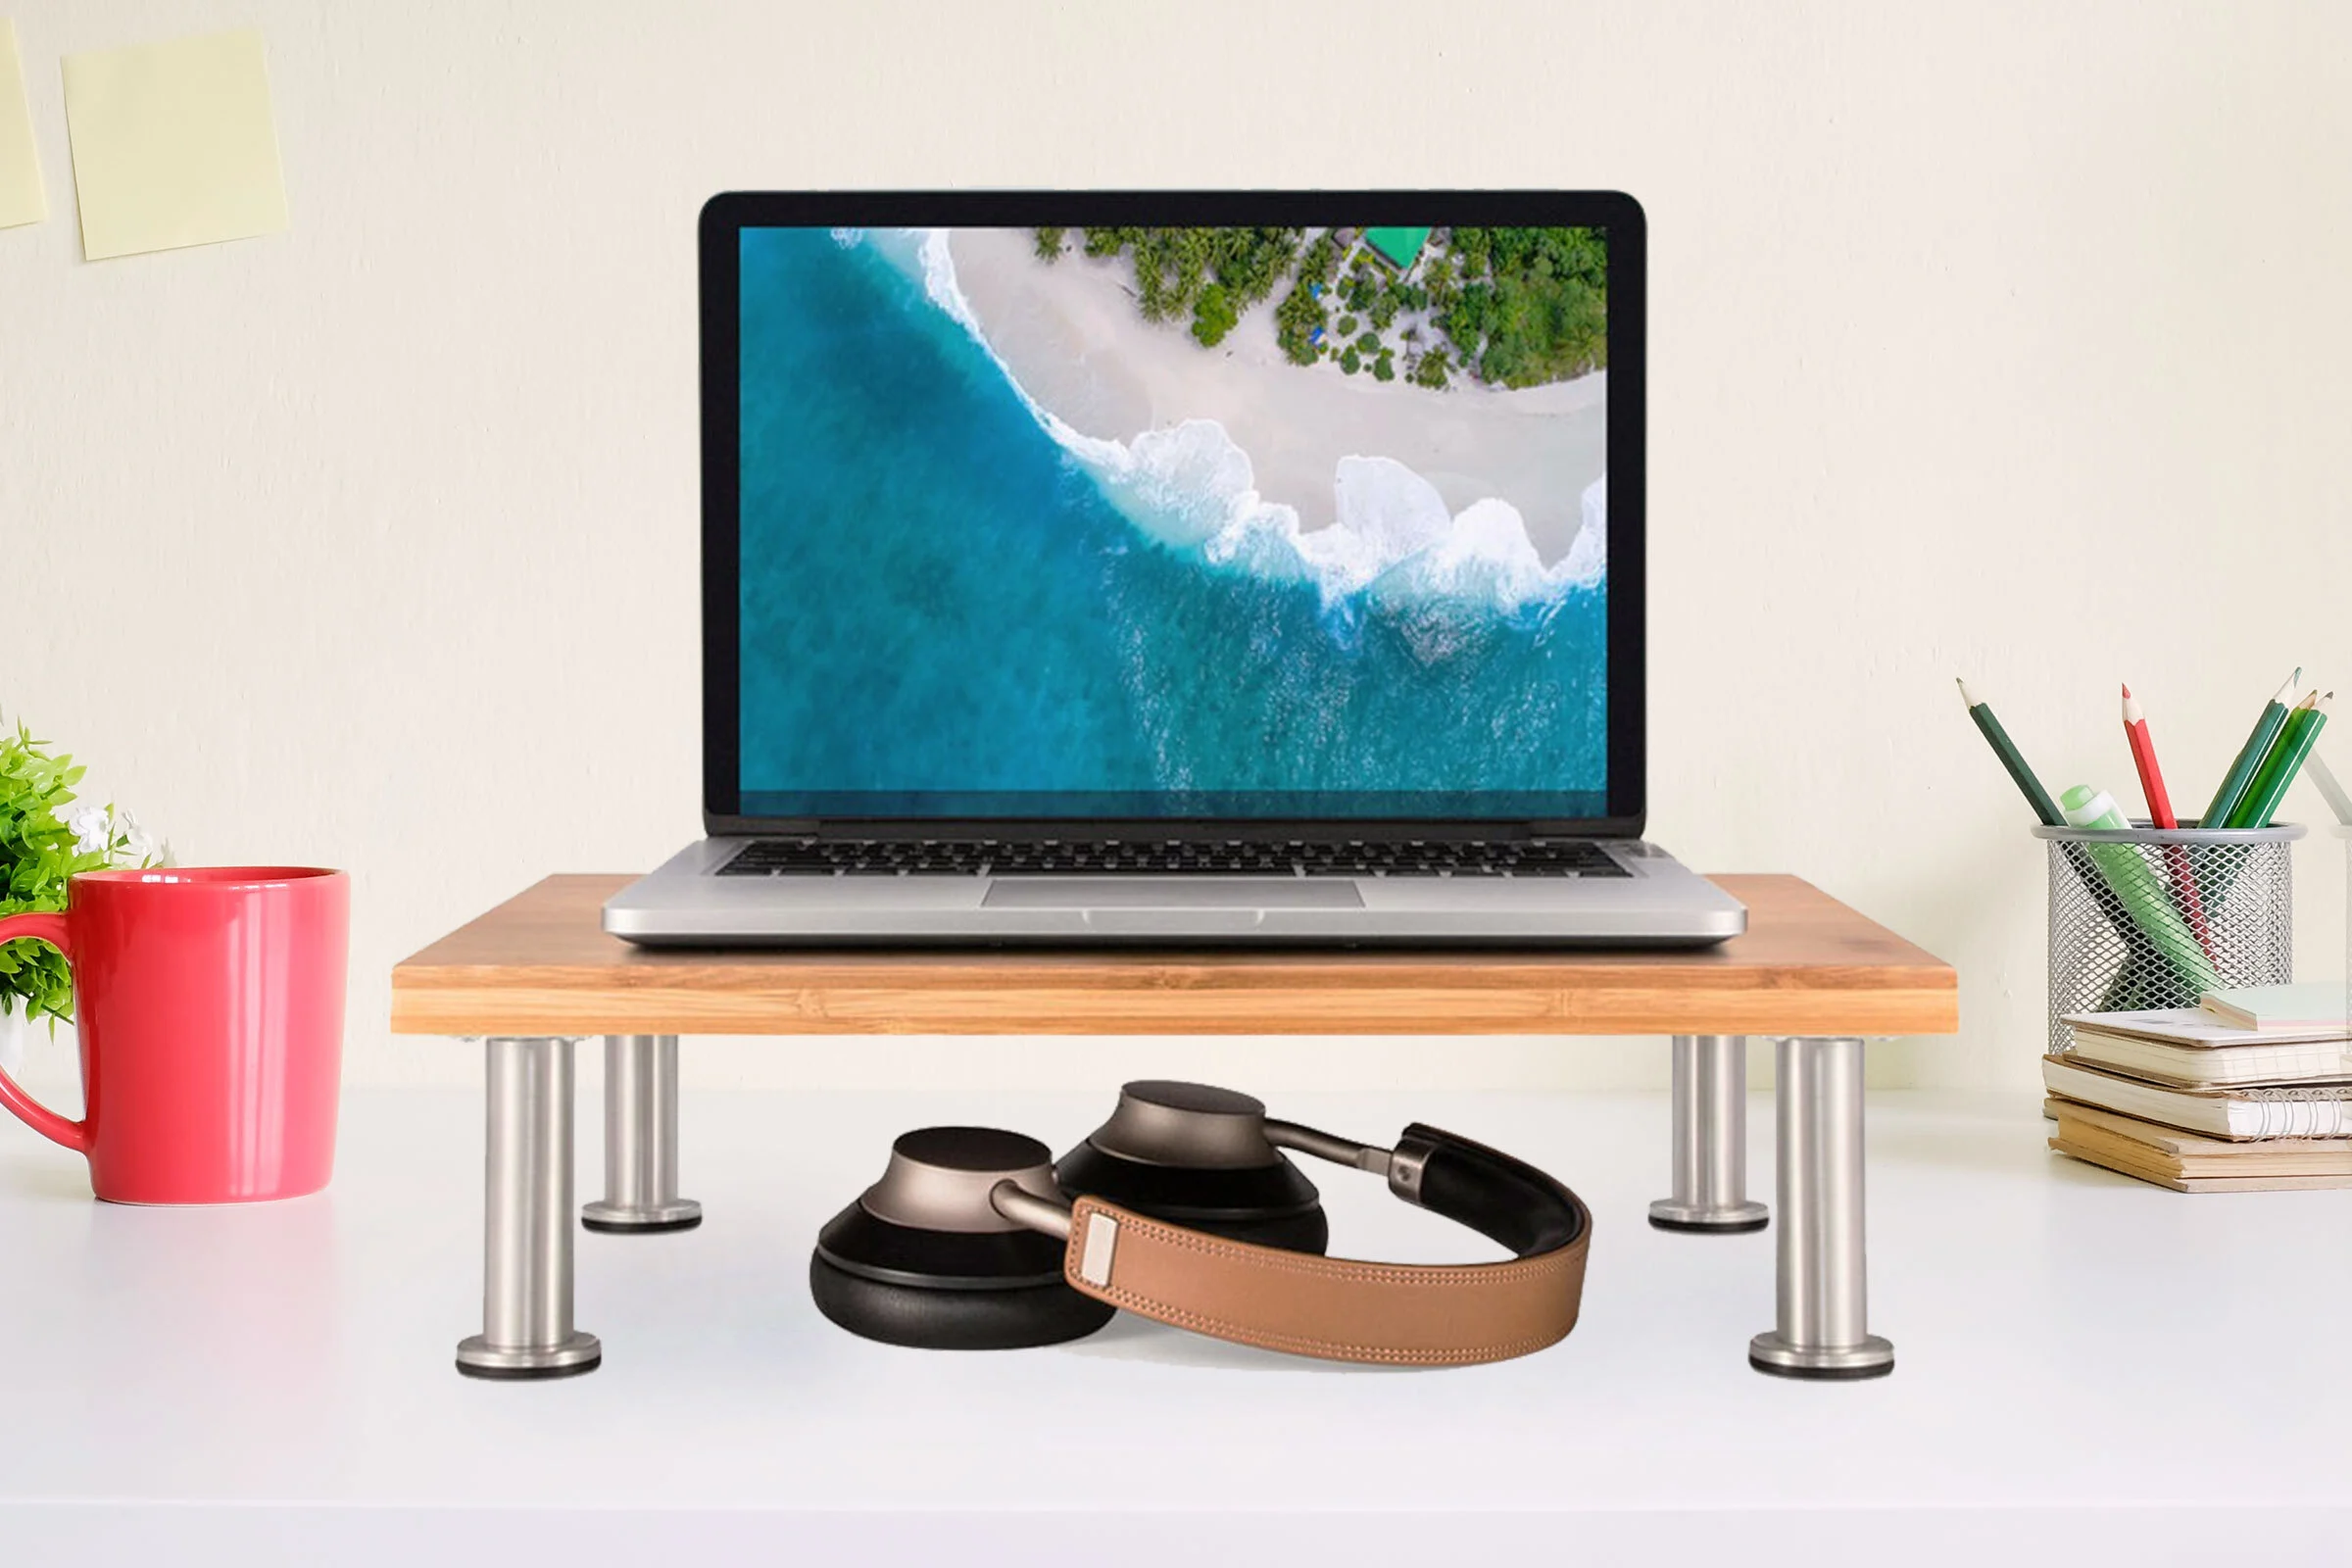 The Office Oasis Bamboo Computer Monitor Stand: Lasts a Lifetime